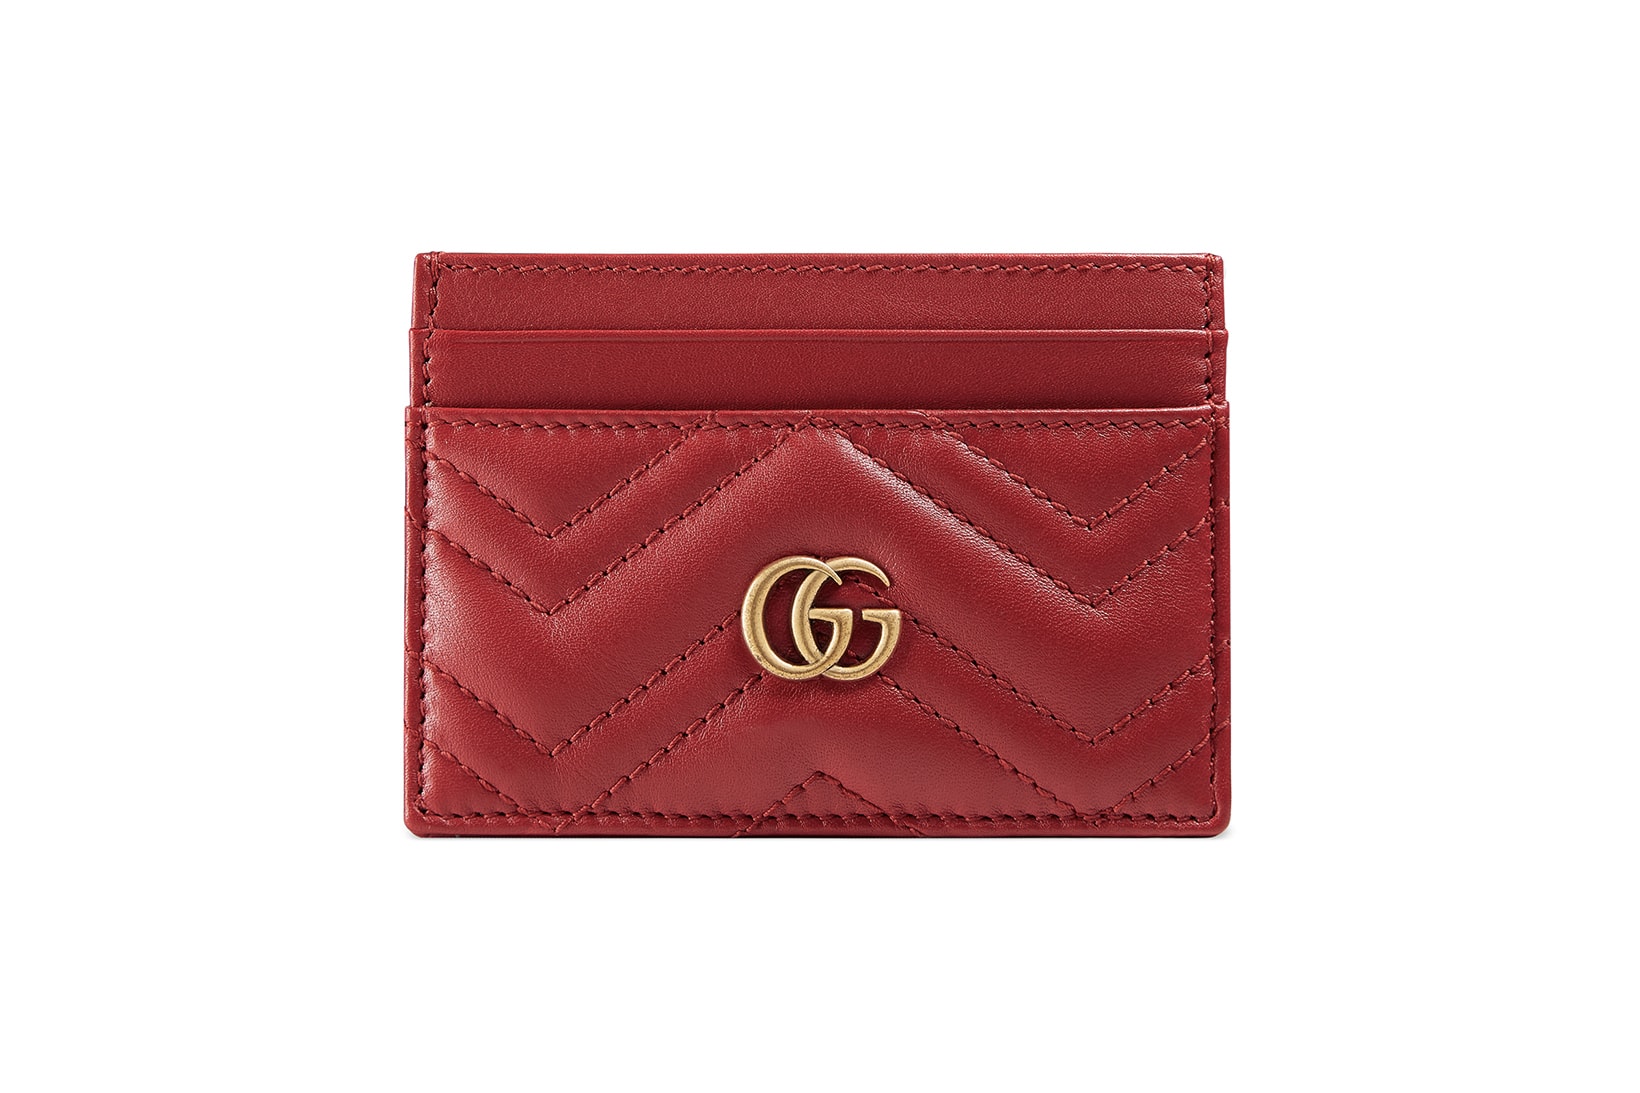 Gucci Leather Marmont Card Case Light Dusty Pink Hibiscus Red Black